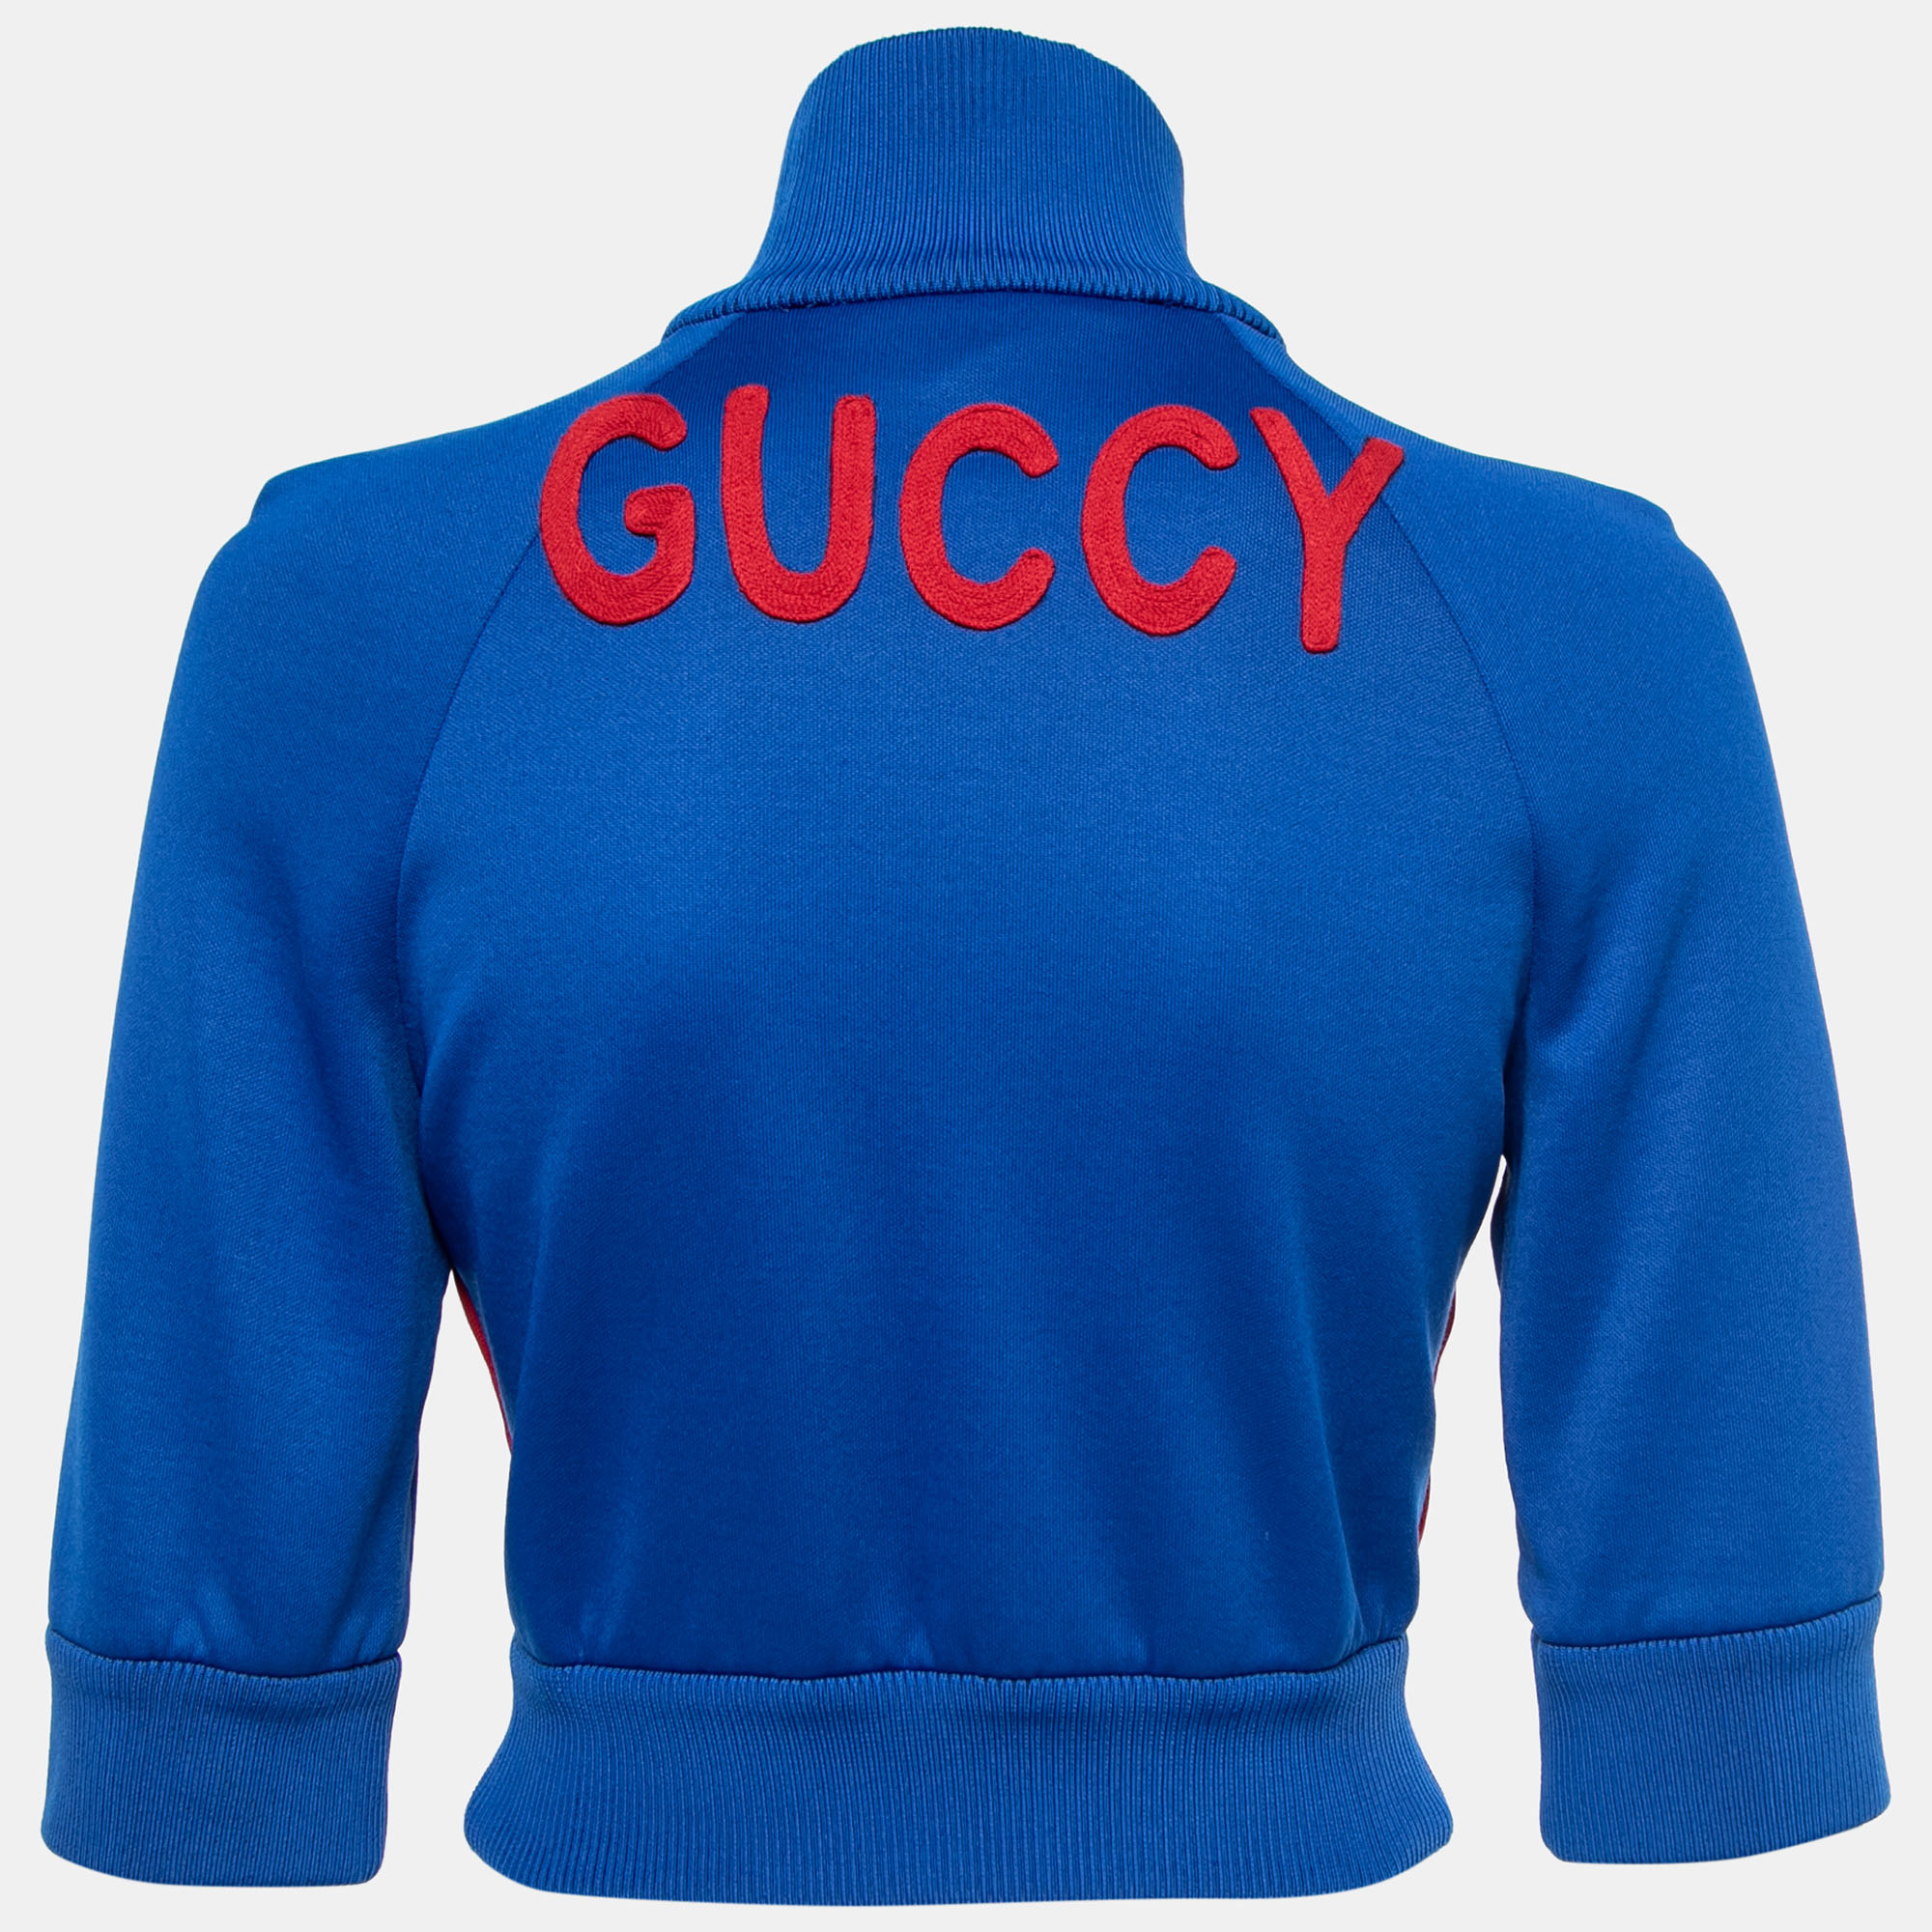 

Gucci Blue Knit Guccy-Embroidered Cropped Zip-Front Jacket